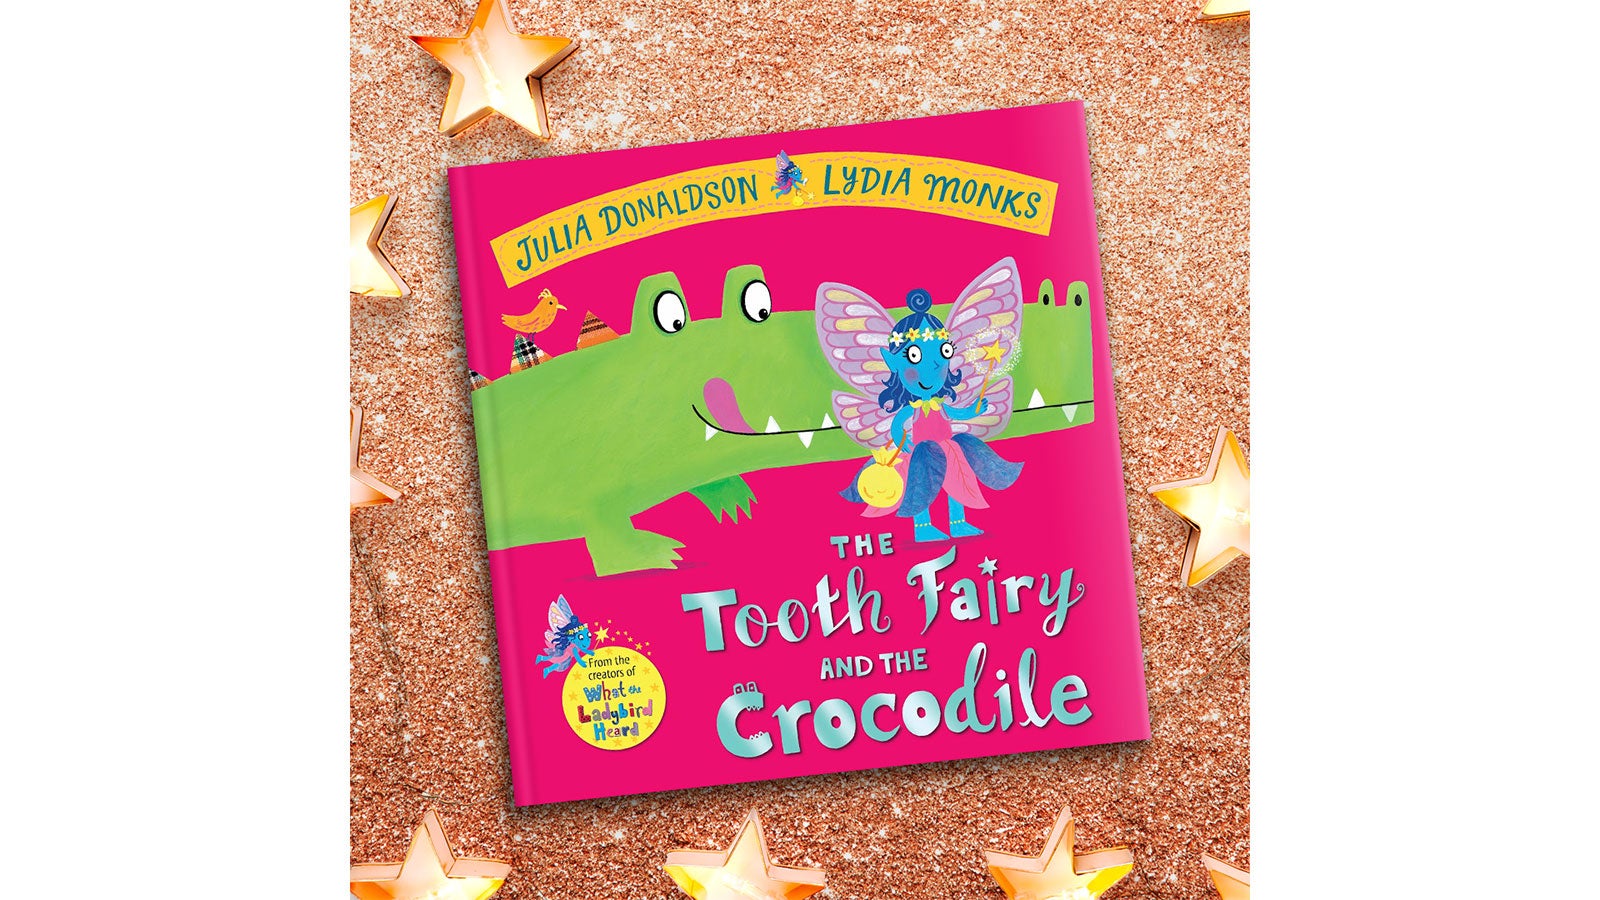 The Tooth Fairy and the Crocodile book cover on a gold sparkly background with stars